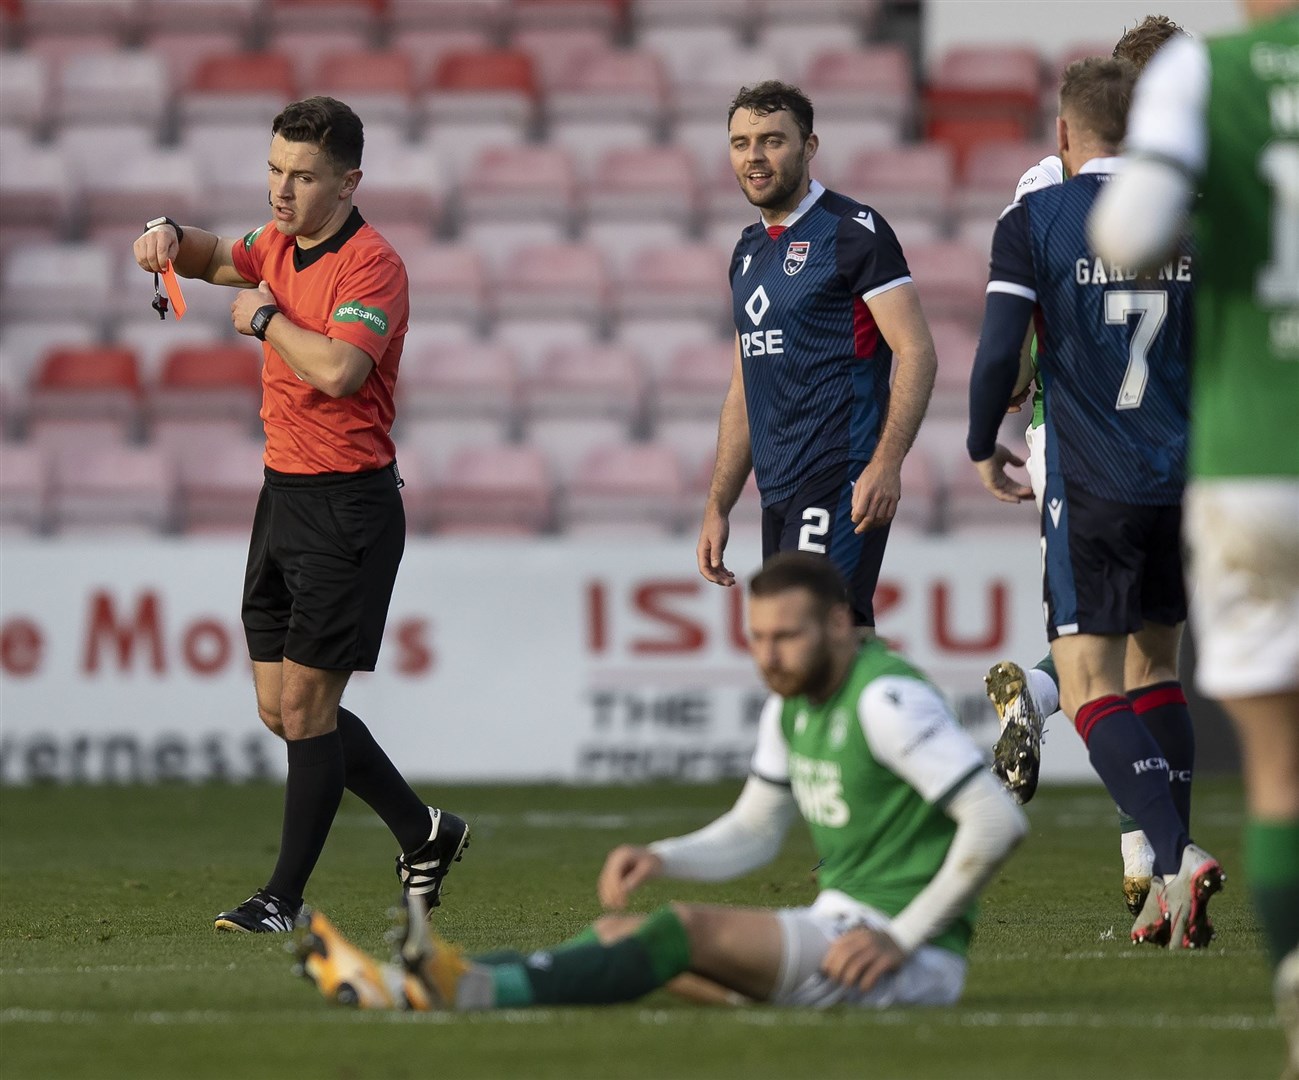 Picture - Ken Macpherson, Inverness. Ross County(0) v Hibs(0). 17.10.20. Ross County's Connor Randall is shown red card after tackle on Hibs’ Martin Boyle - in the Hibs half!